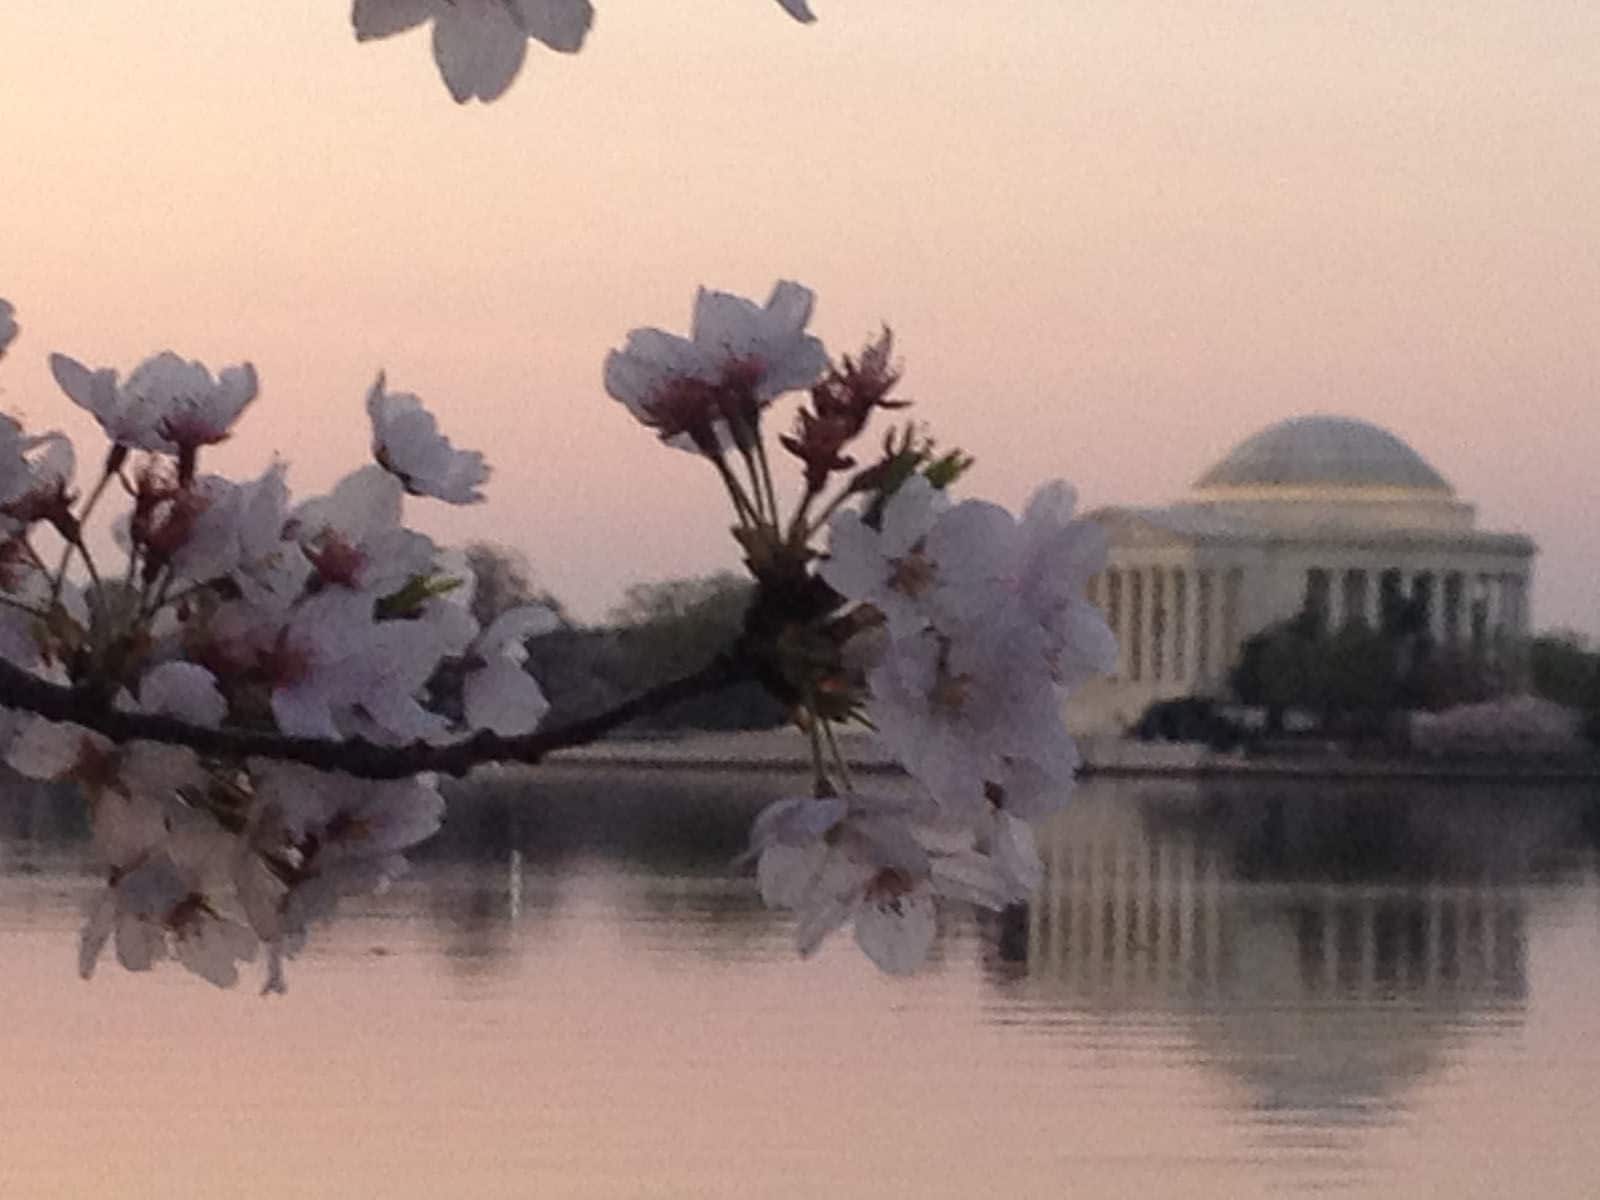 Cherry blossoms in bloom next to the Tidal Basin in Washington, D.C. (WTOP/John Domen)